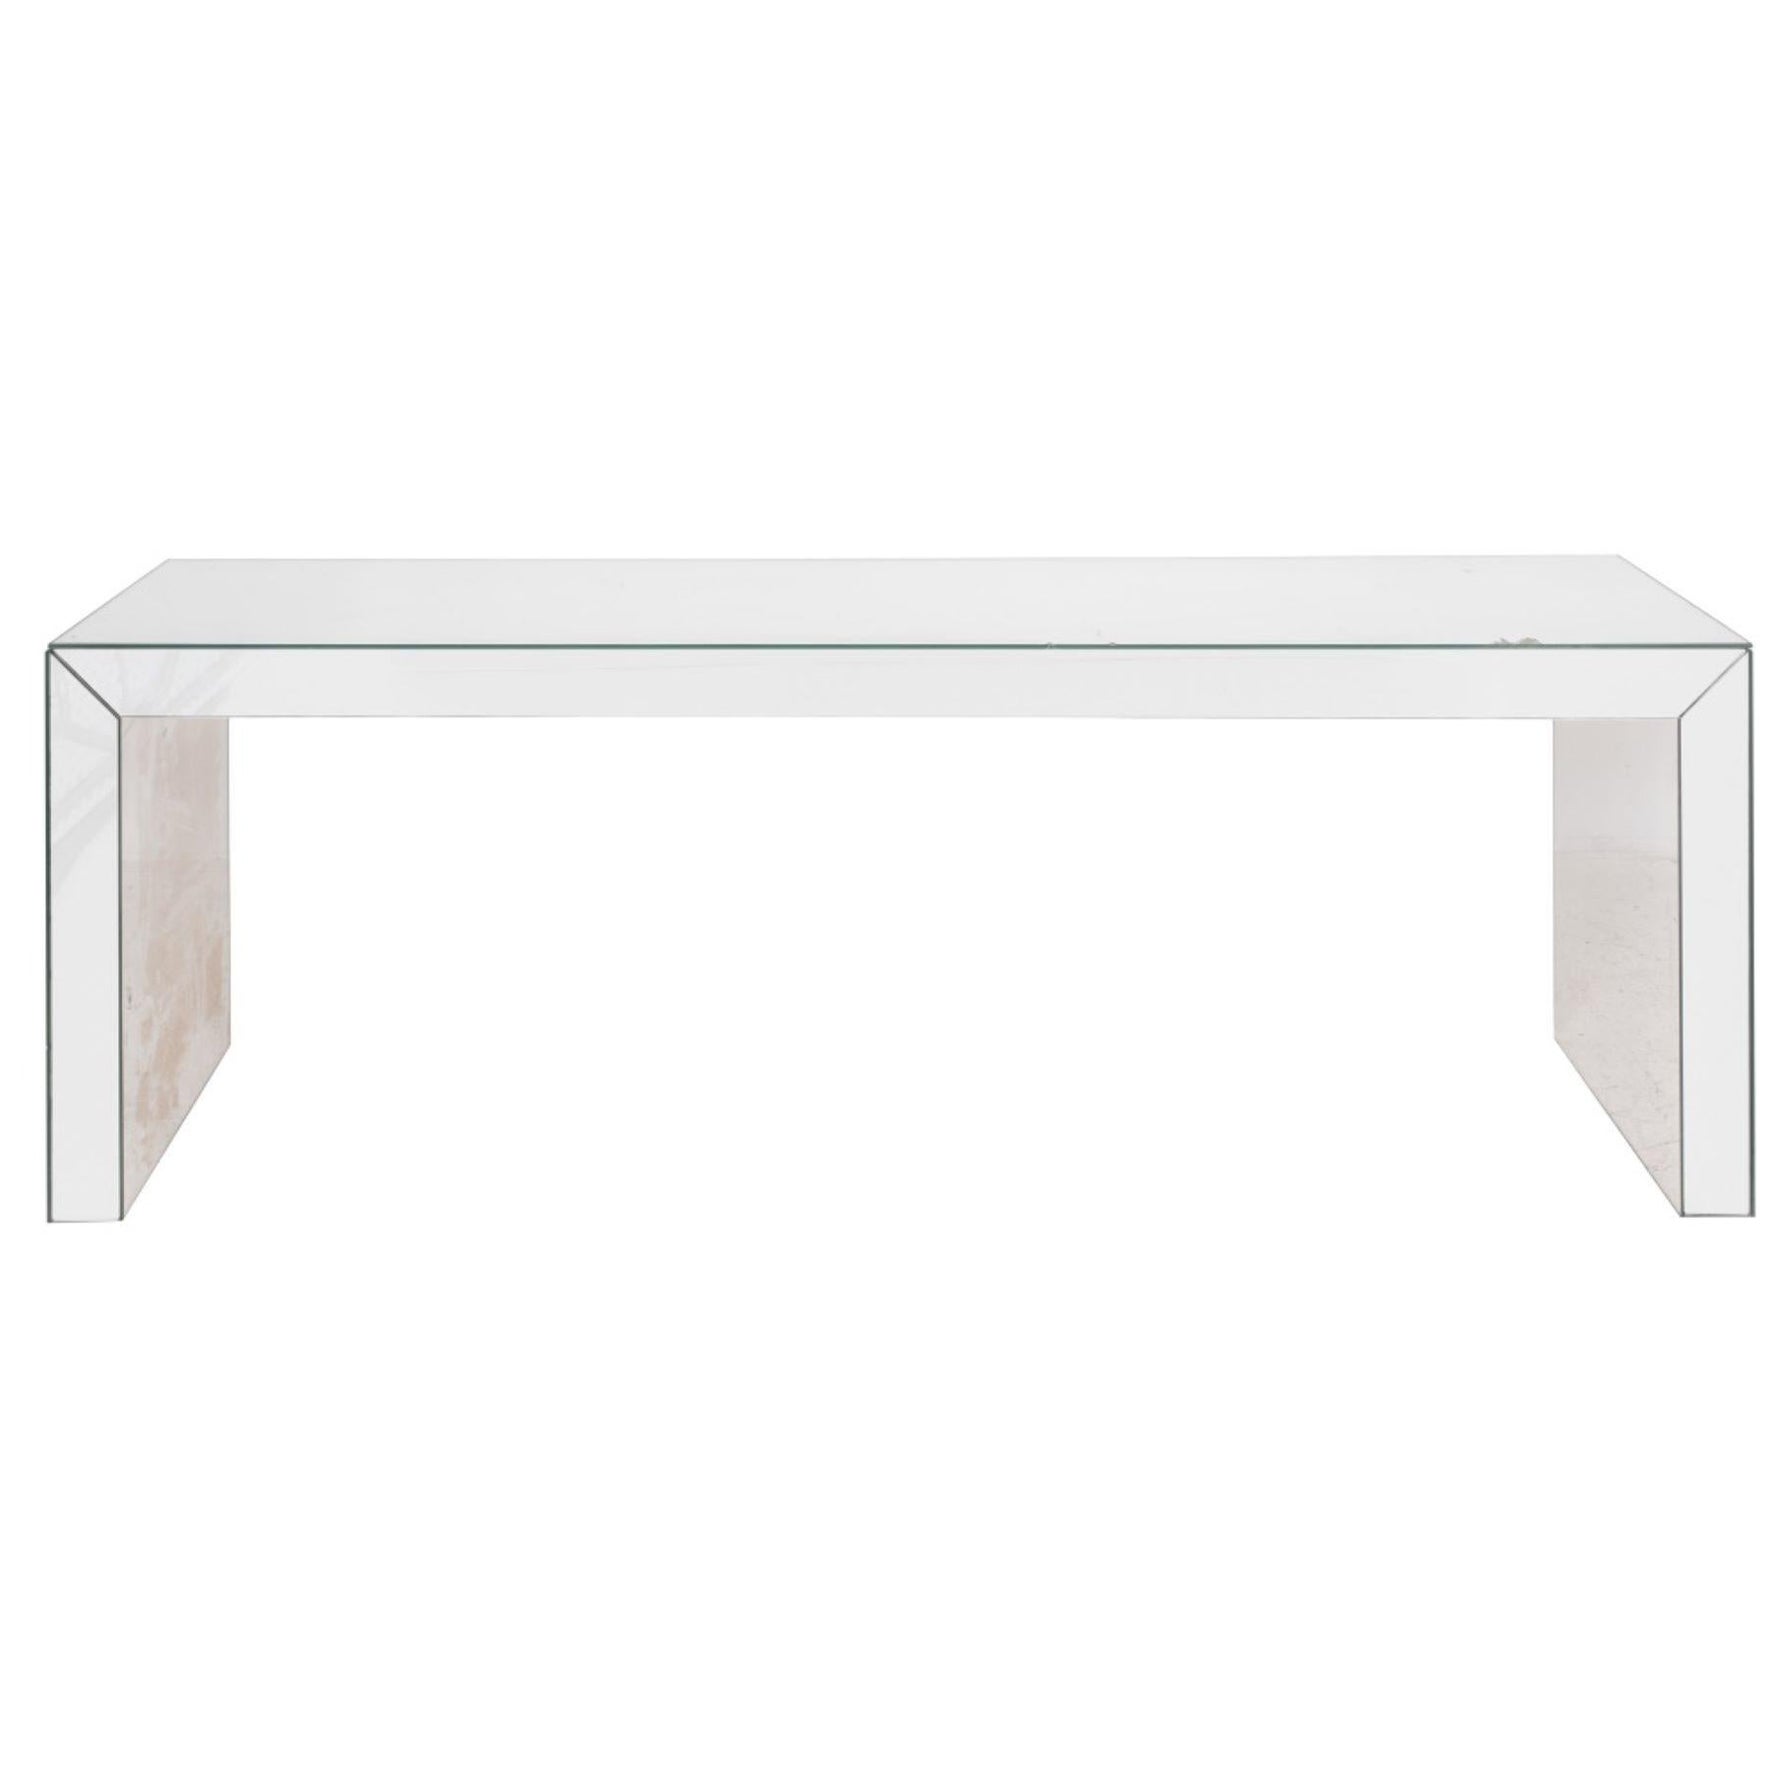 Mirrored Long Waterfall Console or Sofa Table